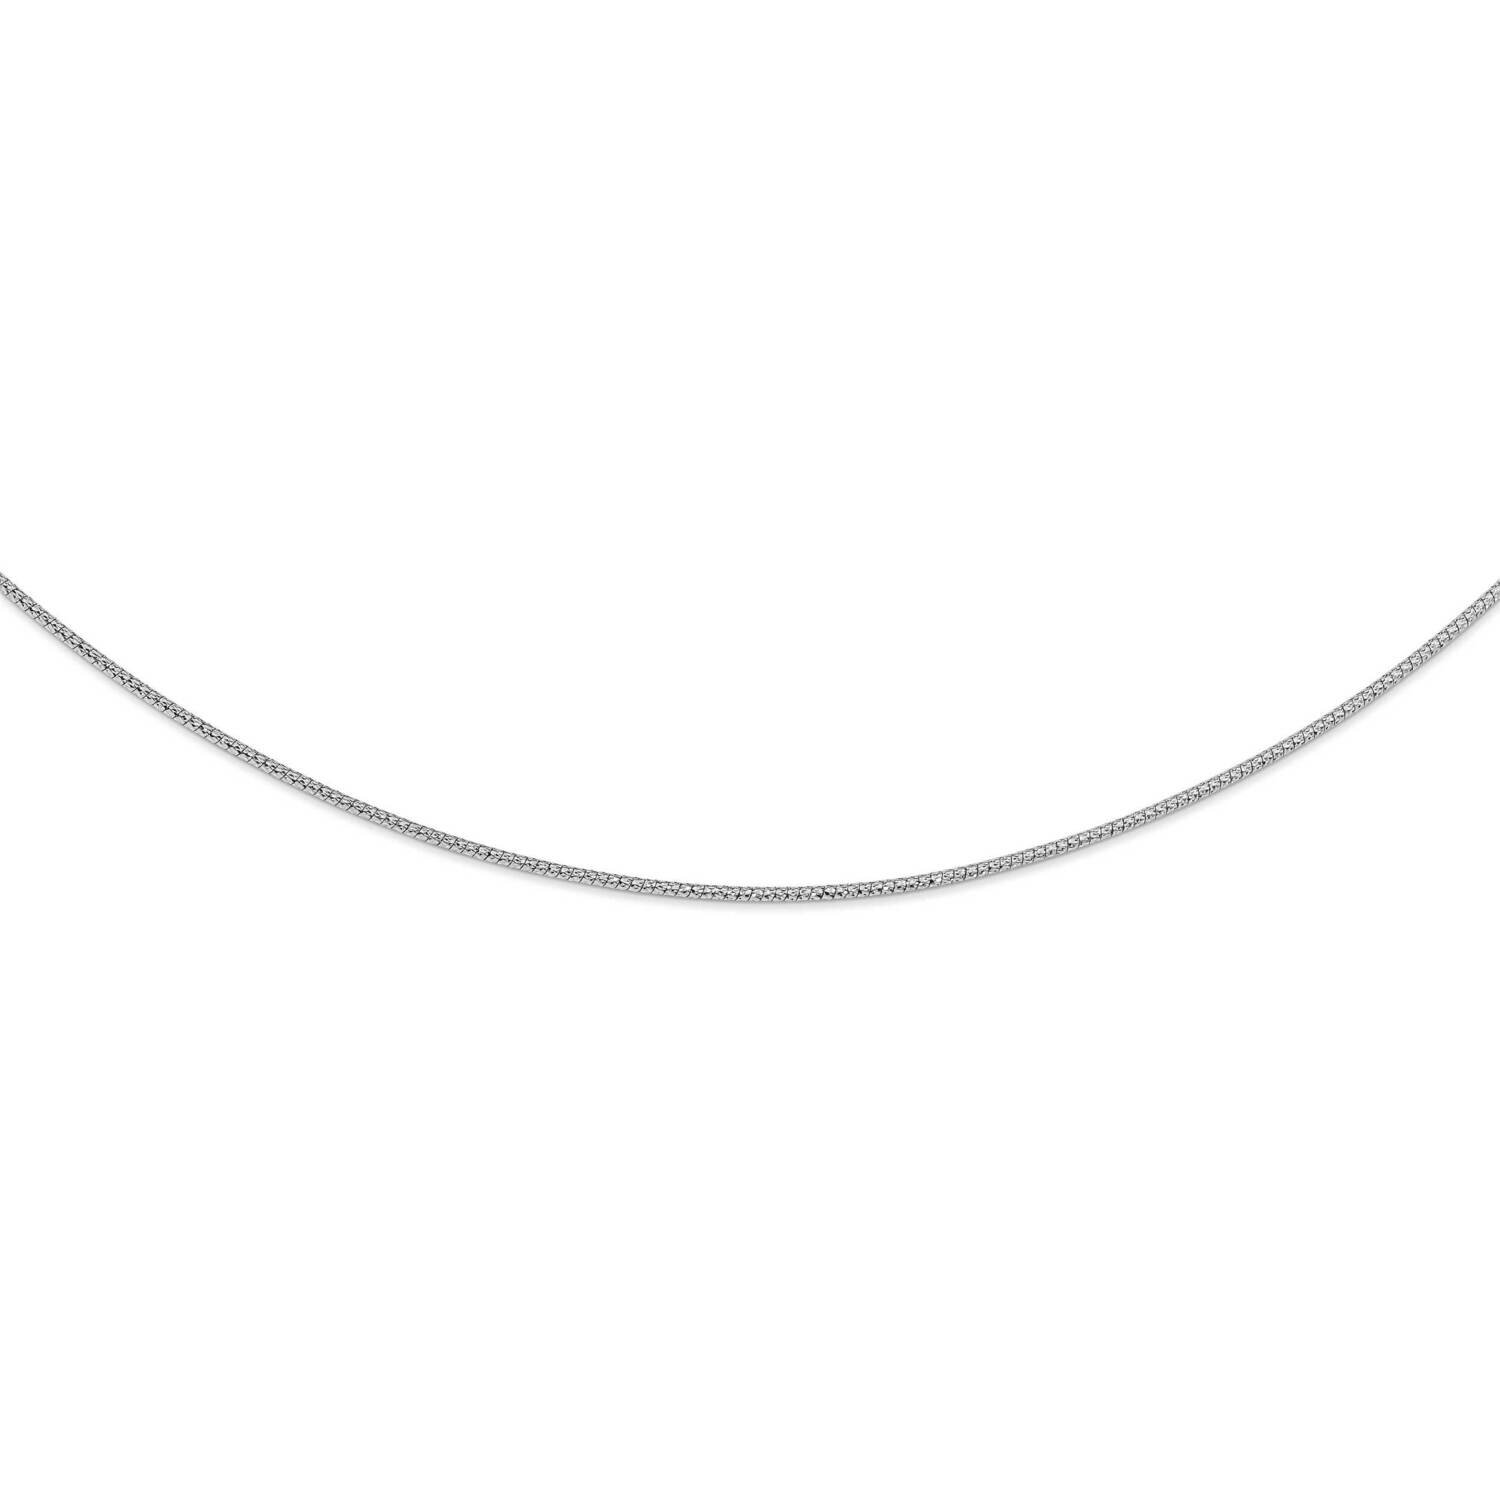 1.5mm Diamond-Cut Neckwire Necklace 14k White Gold HB-1331-18